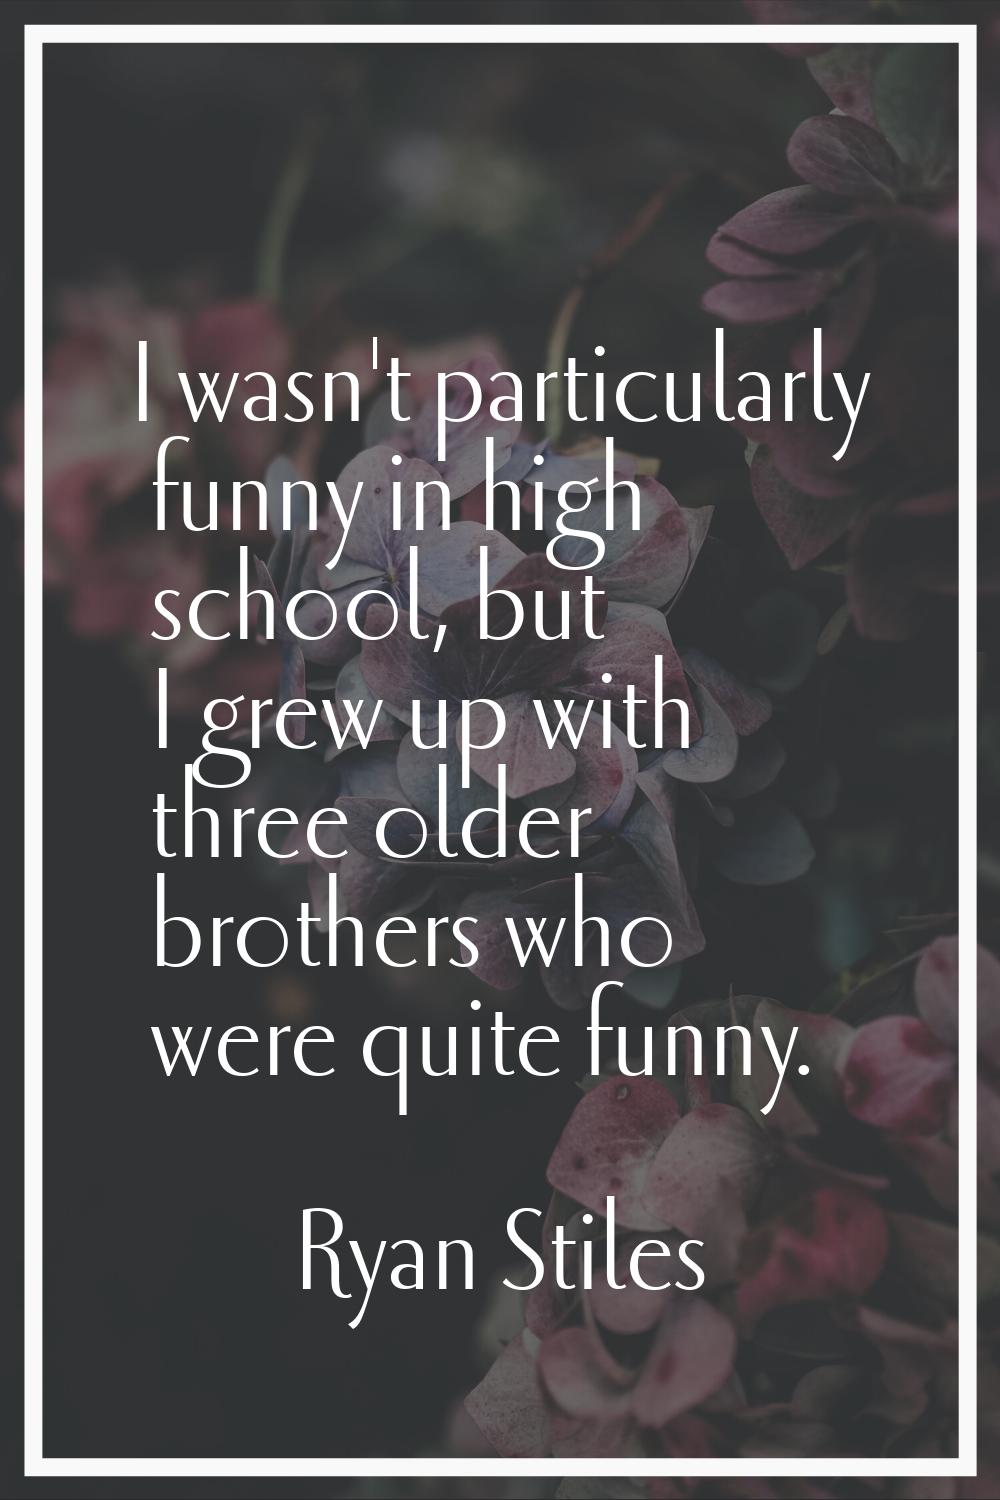 I wasn't particularly funny in high school, but I grew up with three older brothers who were quite 